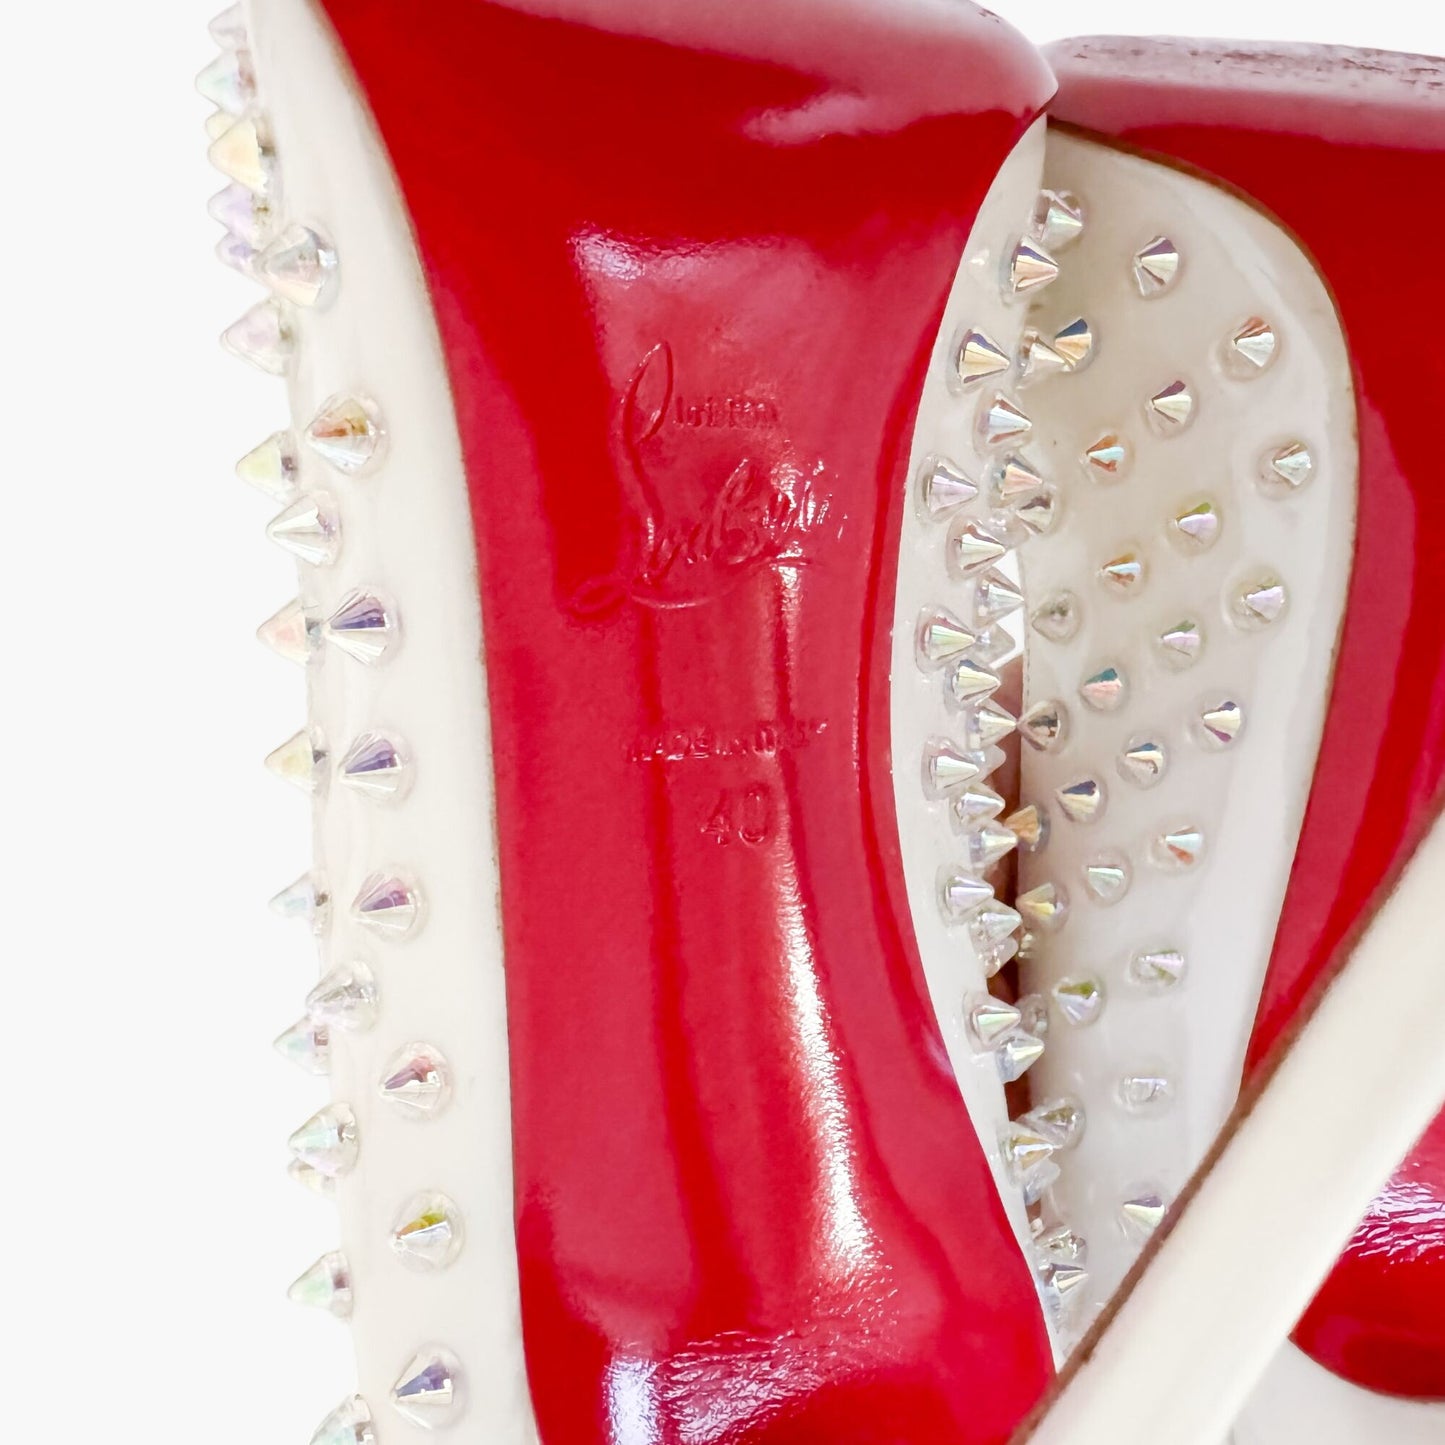 Christian Louboutin Follies Spikes 100 Pumps in White AB Patent Size 40